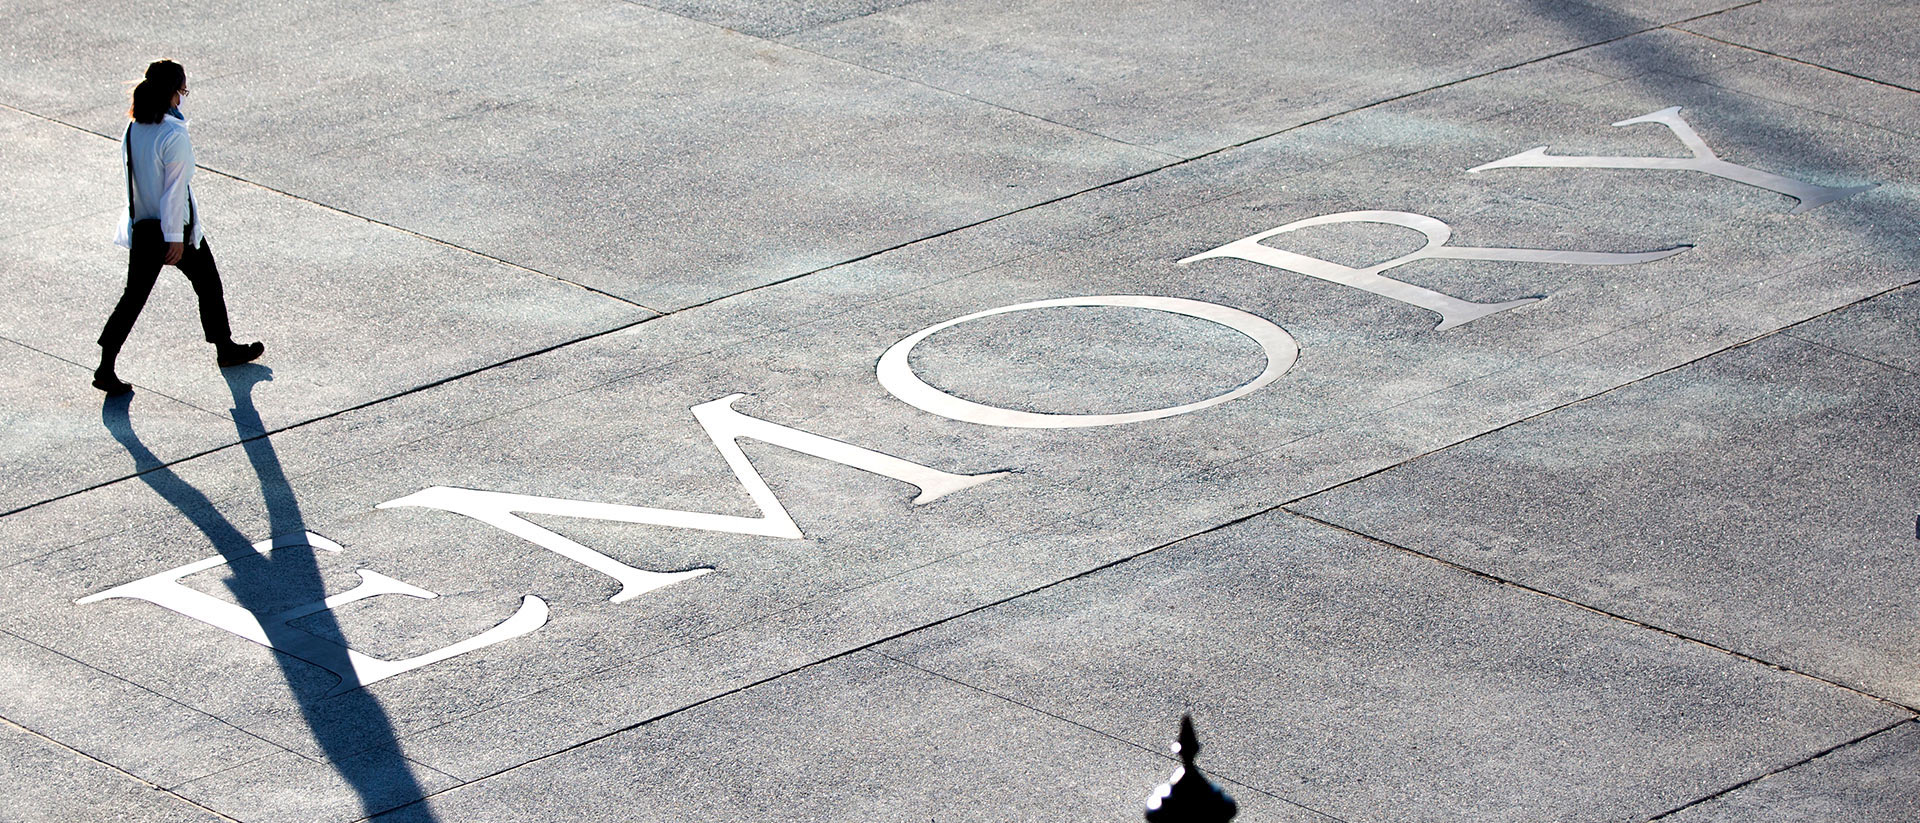 A person walking on a sidewalk inset with the Emory logo